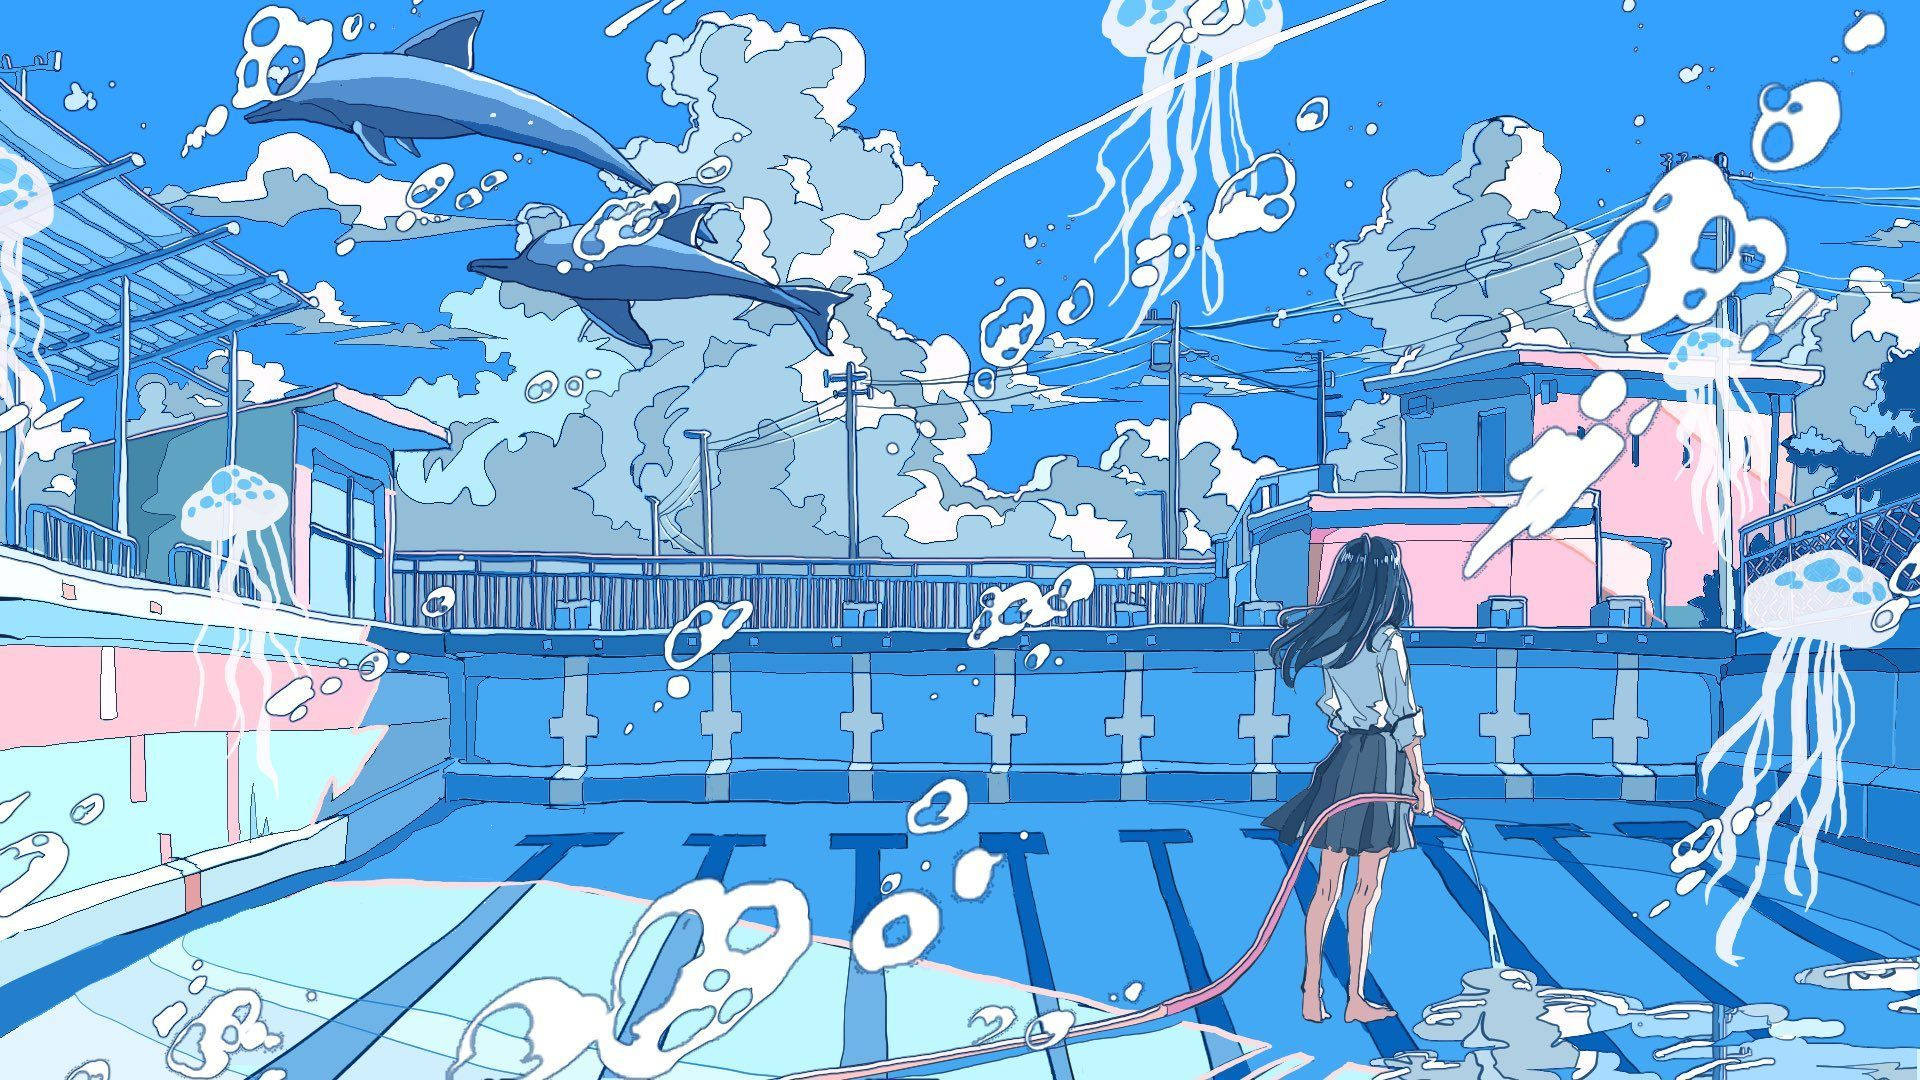 Aesthetic Anime Desktop Swimming Pool With Floating Fish Background